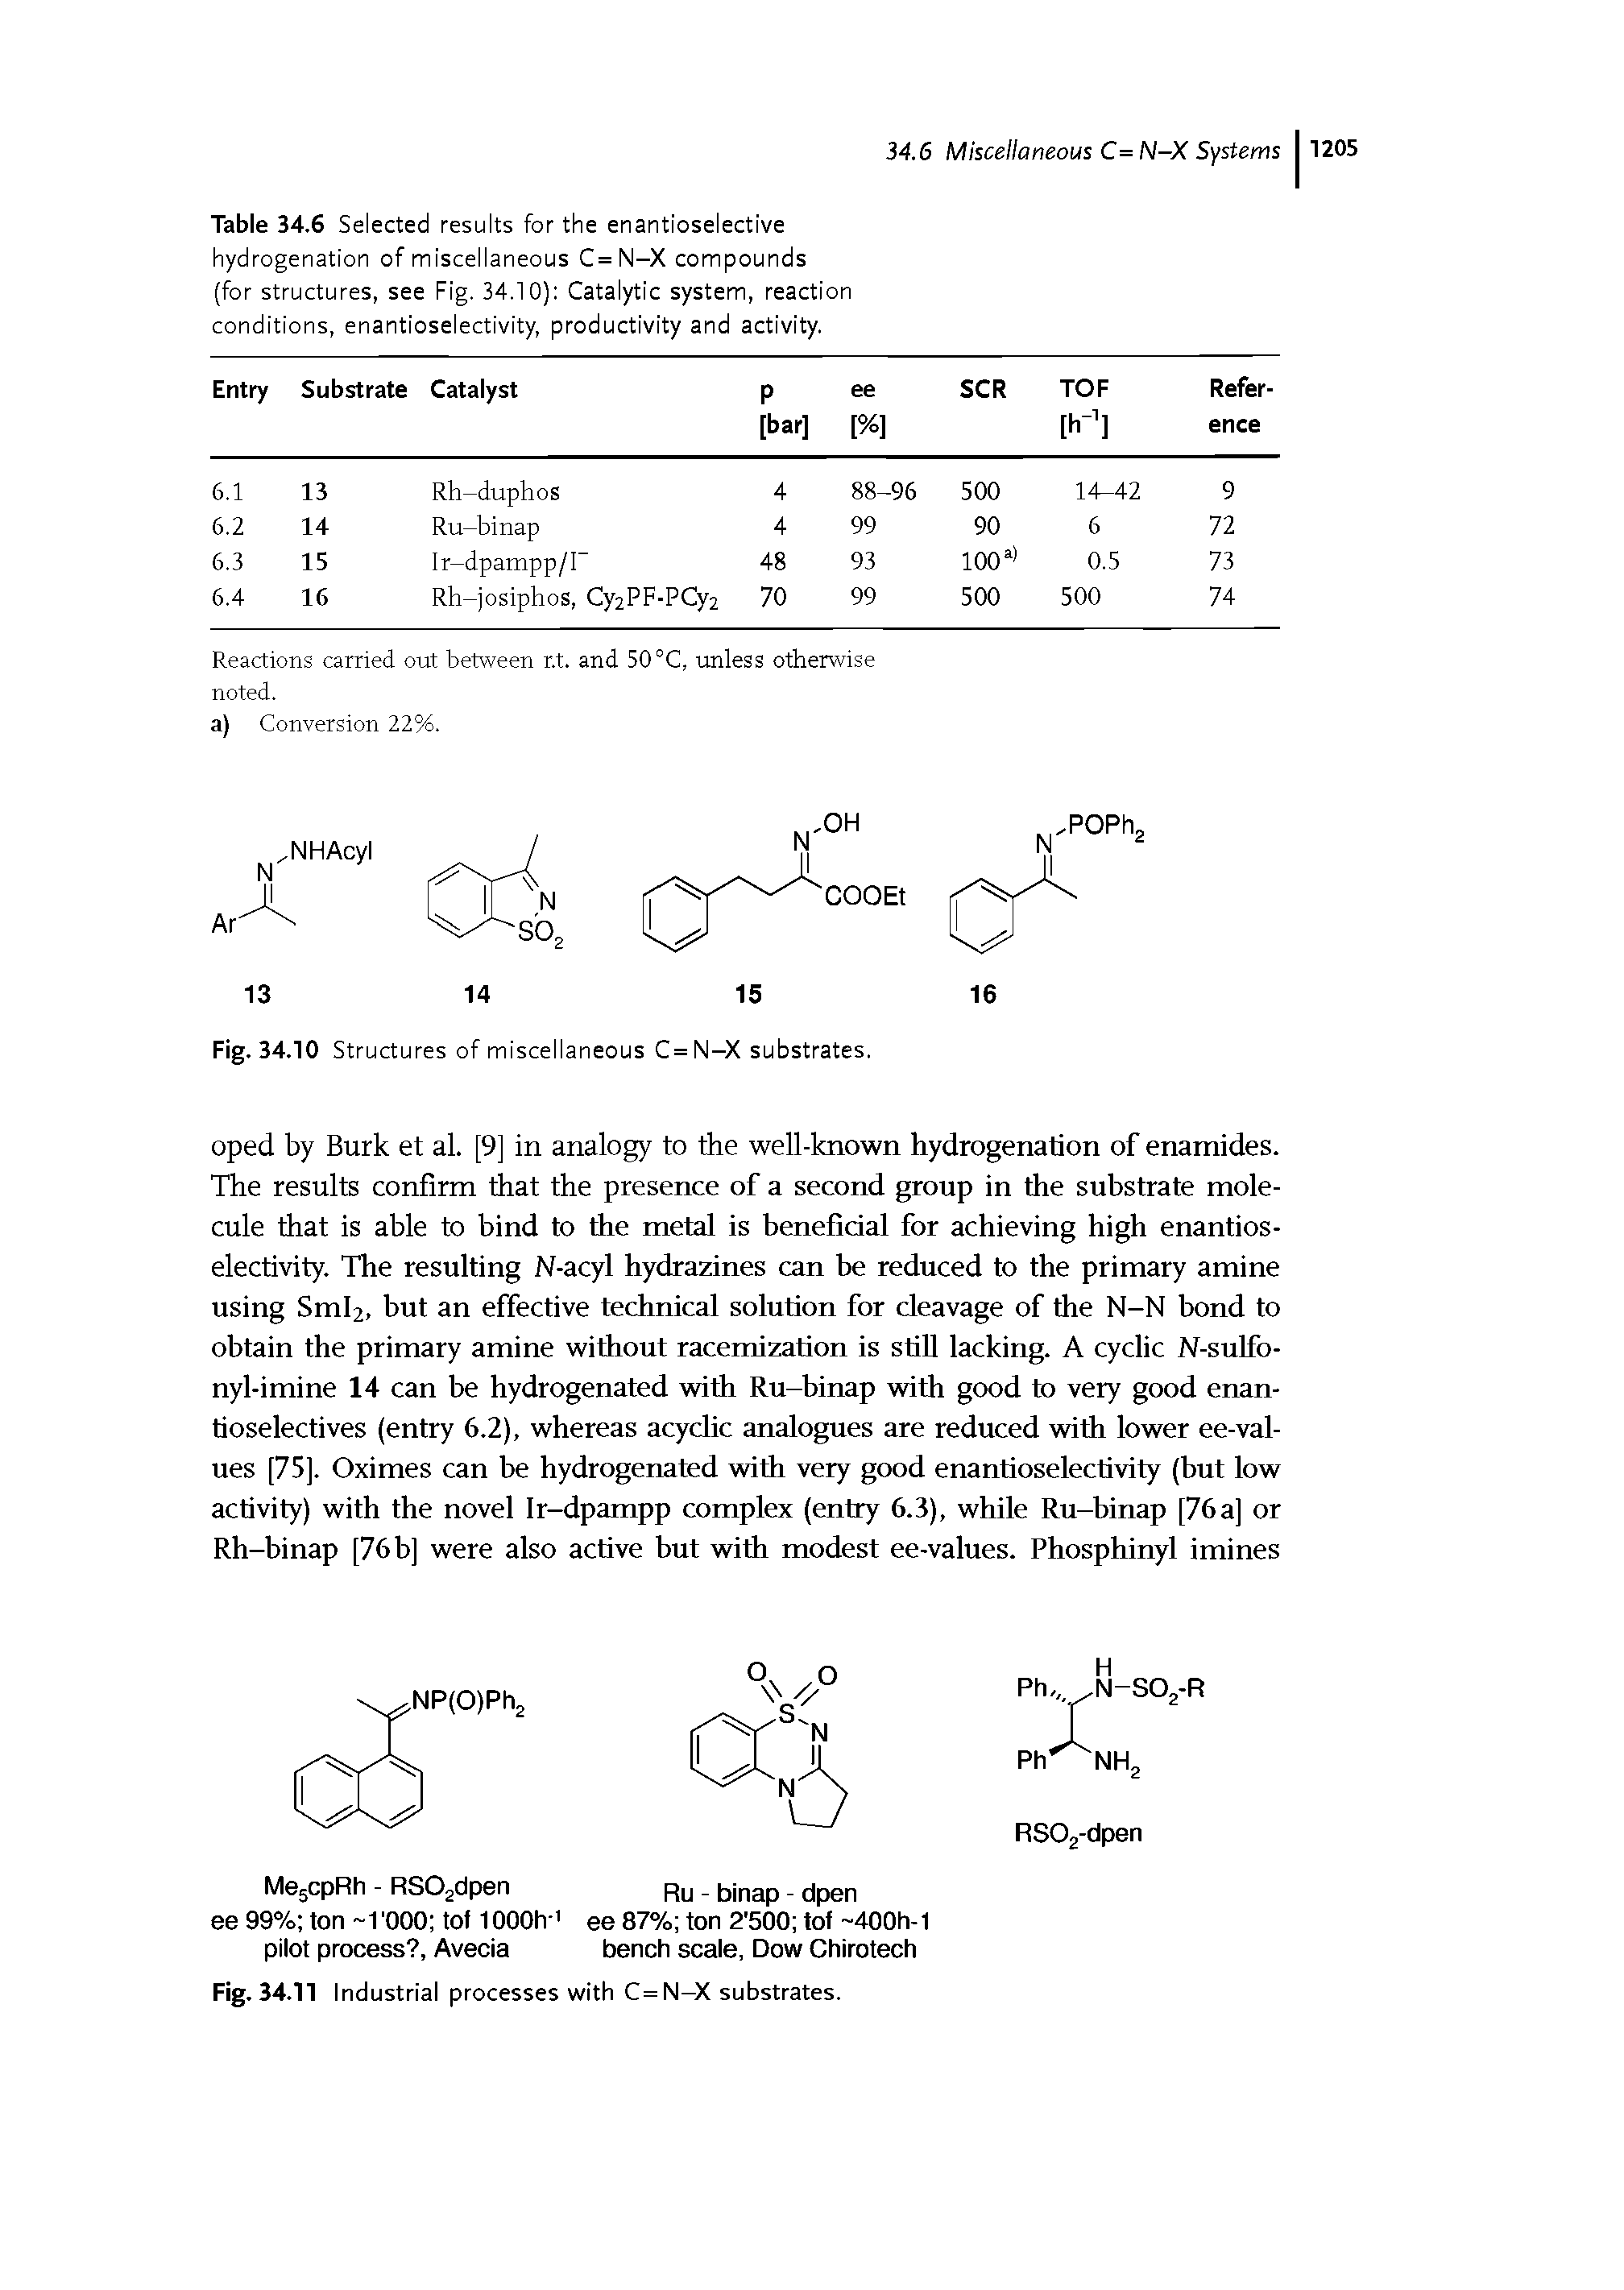 Table 34.6 Selected results for the enantioselective hydrogenation of miscellaneous C=N-X compounds (for structures, see Fig. 34.10) Catalytic system, reaction conditions, enantioselectivity, productivity and activity.